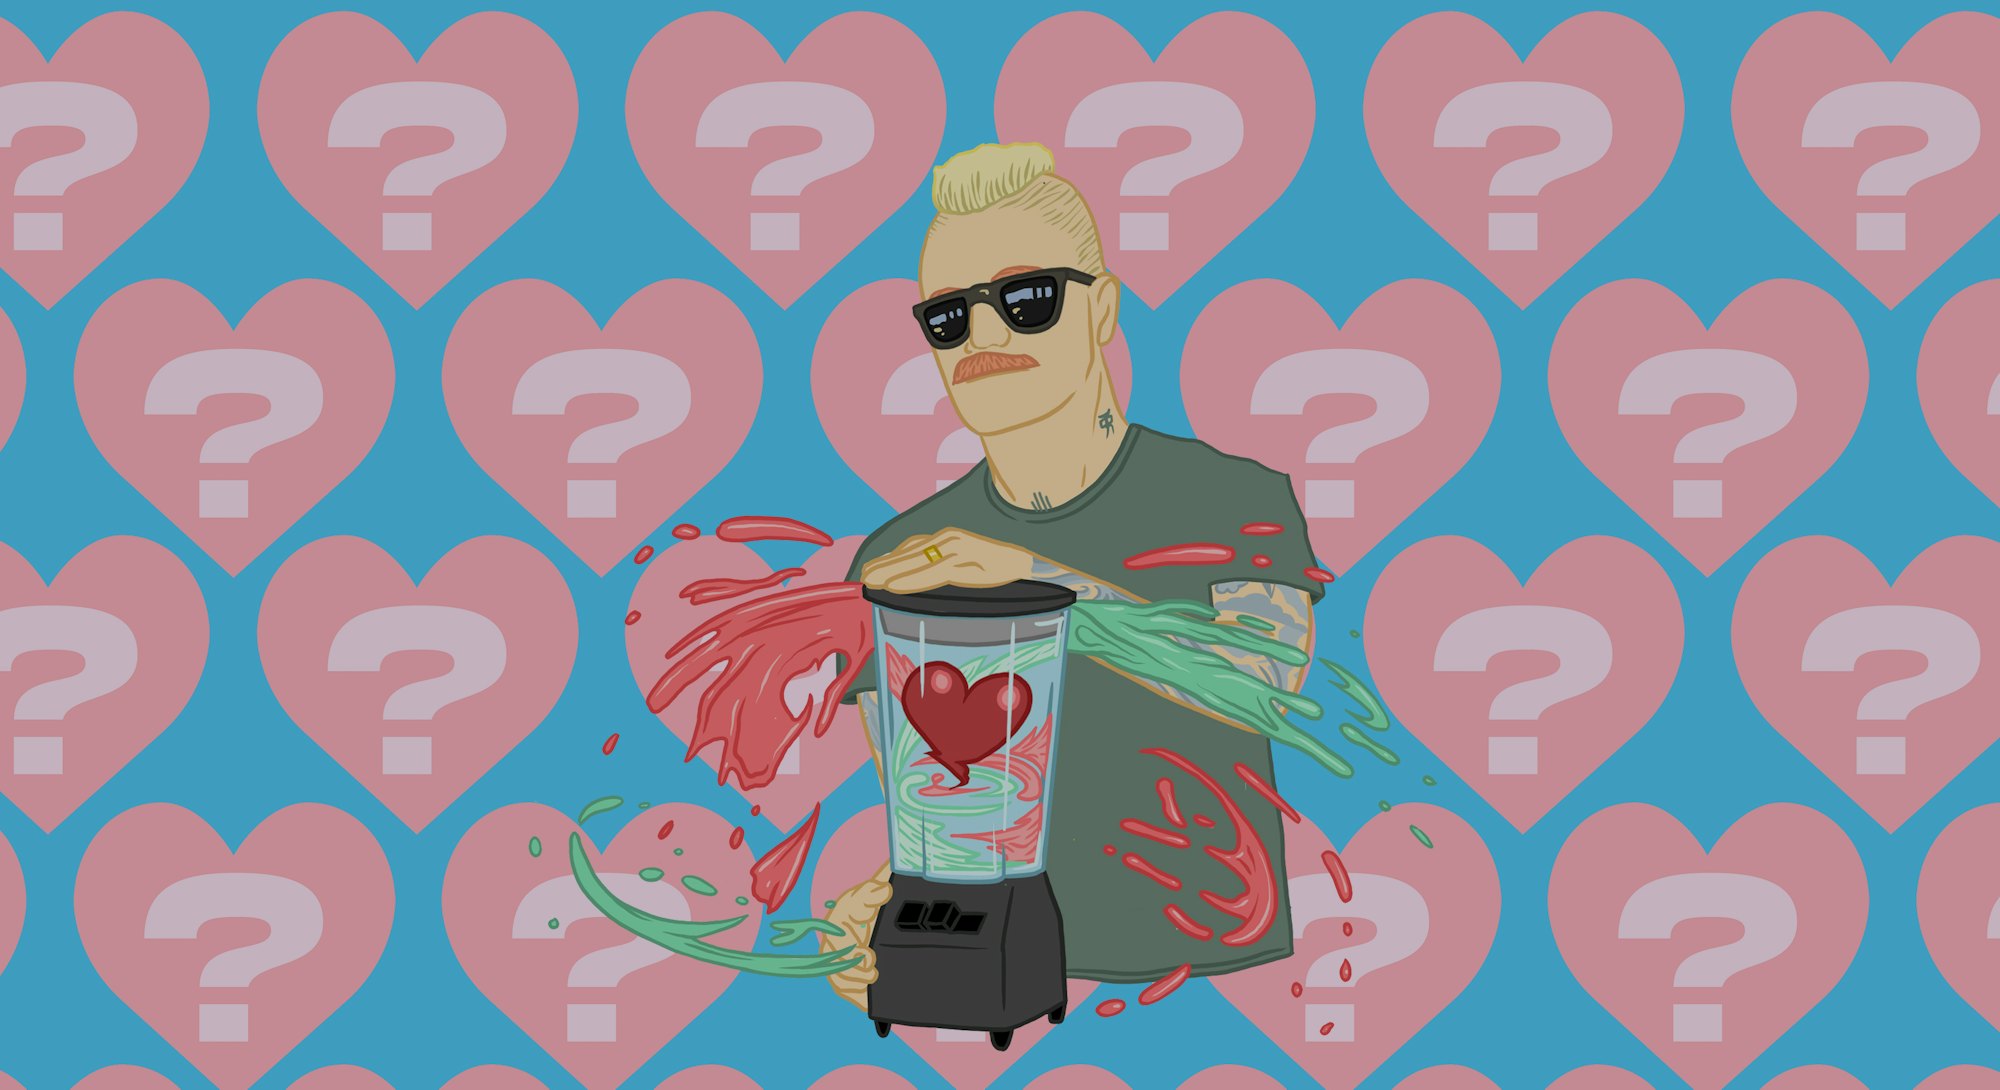 Illustration of Eve 6's Max Collins with hearts and question marks background